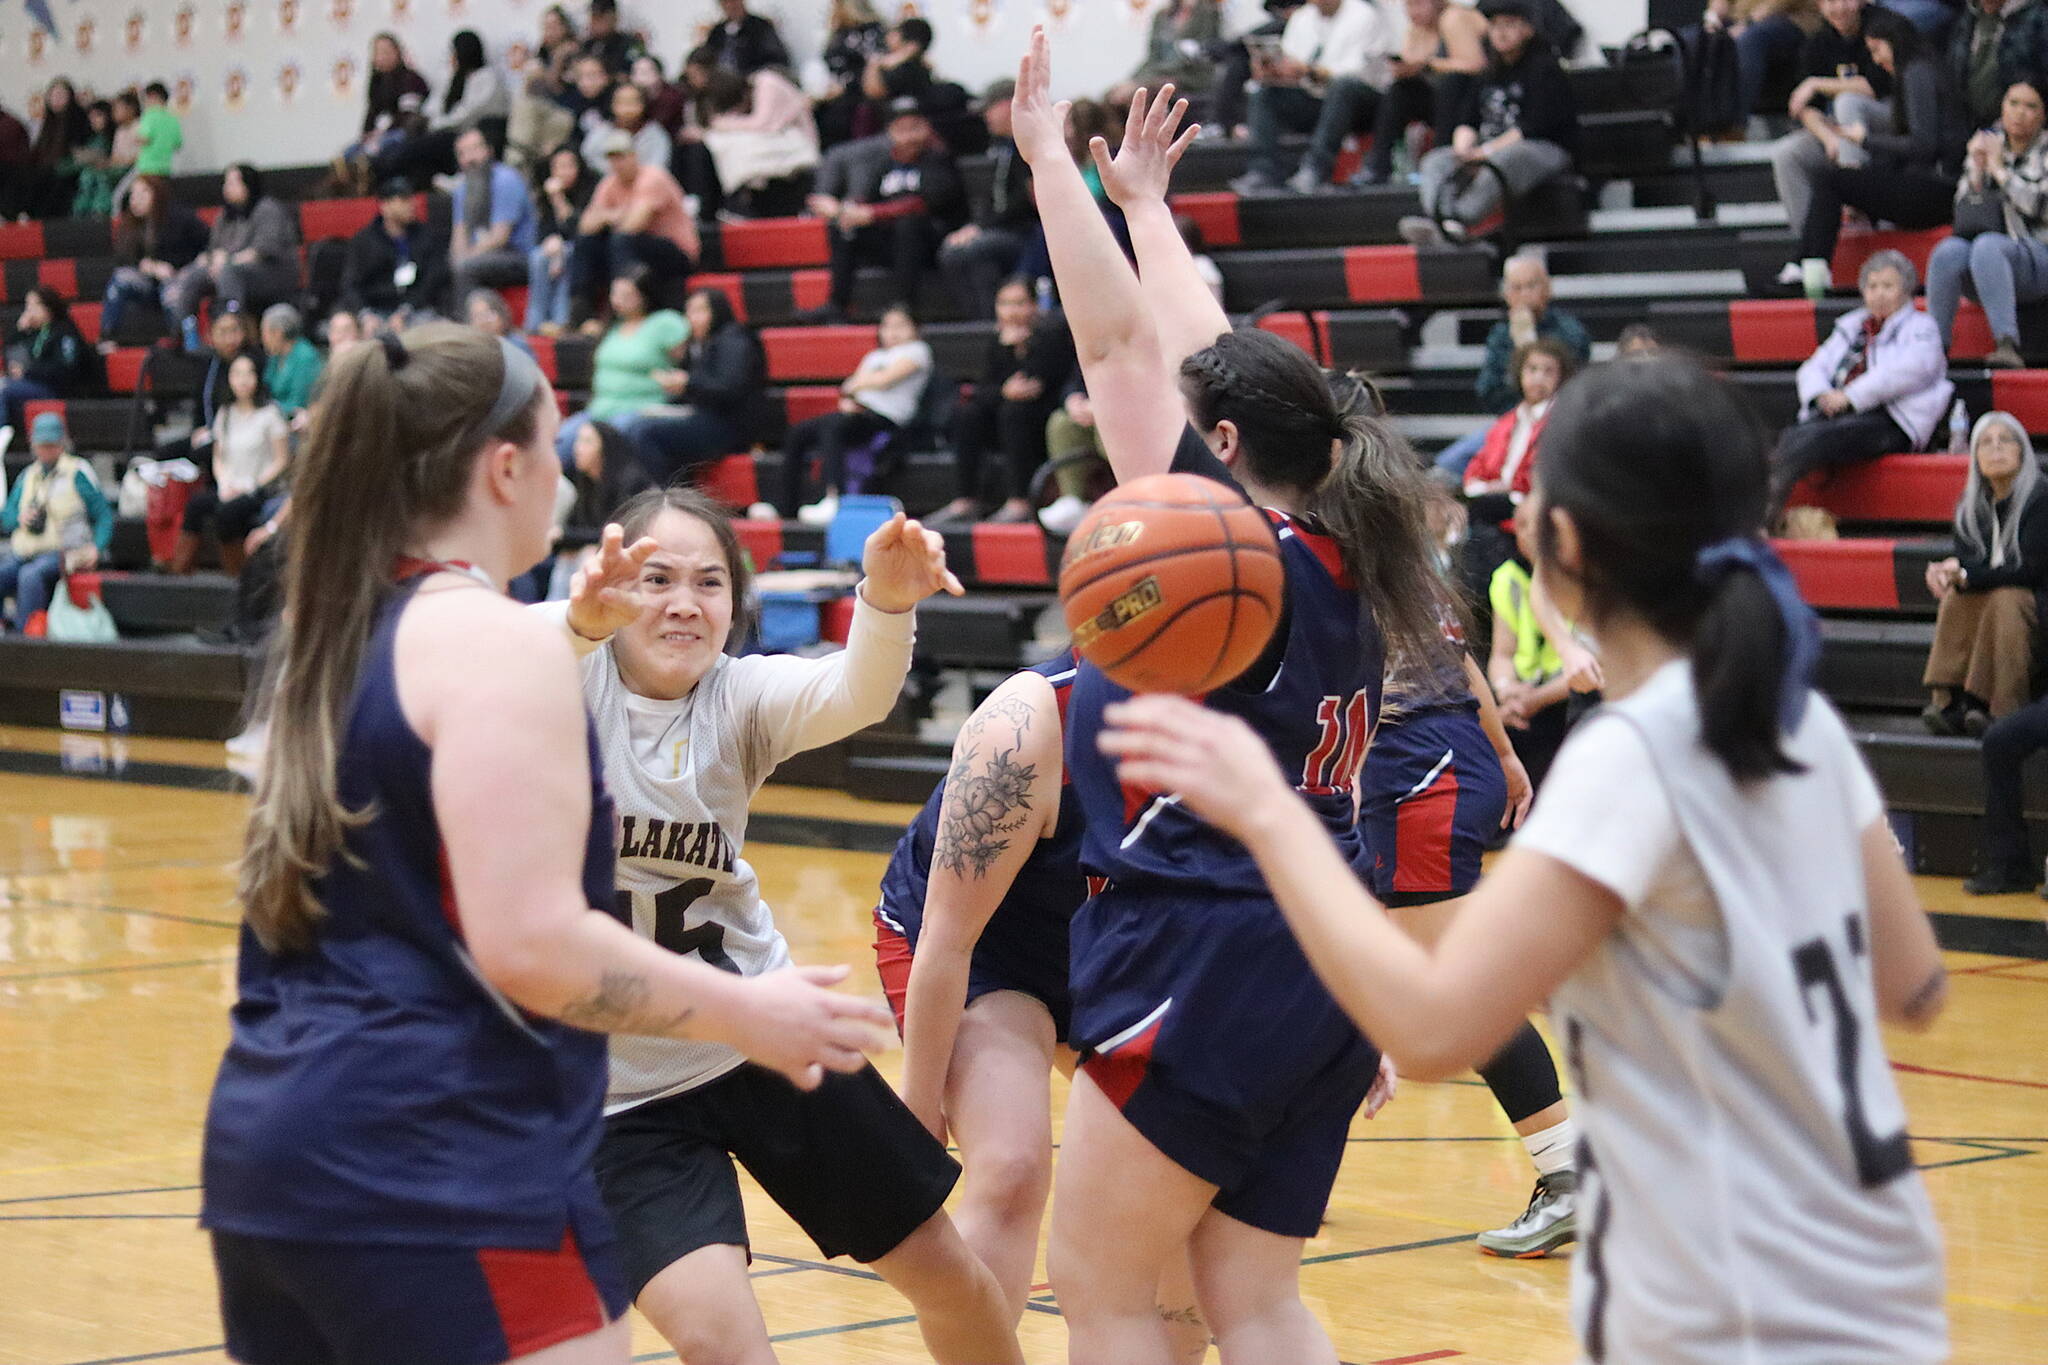 Metlakatla’s Drena Hayward (#15) passes the ball to a teammate in their opening game against Yakutat during the 75th Gold Medal Basketball Tournament on Sunday morning at Juneau-Douglas High School: Yadaa.at Kalé. (Mark Sabbatini / Juneau Empire)